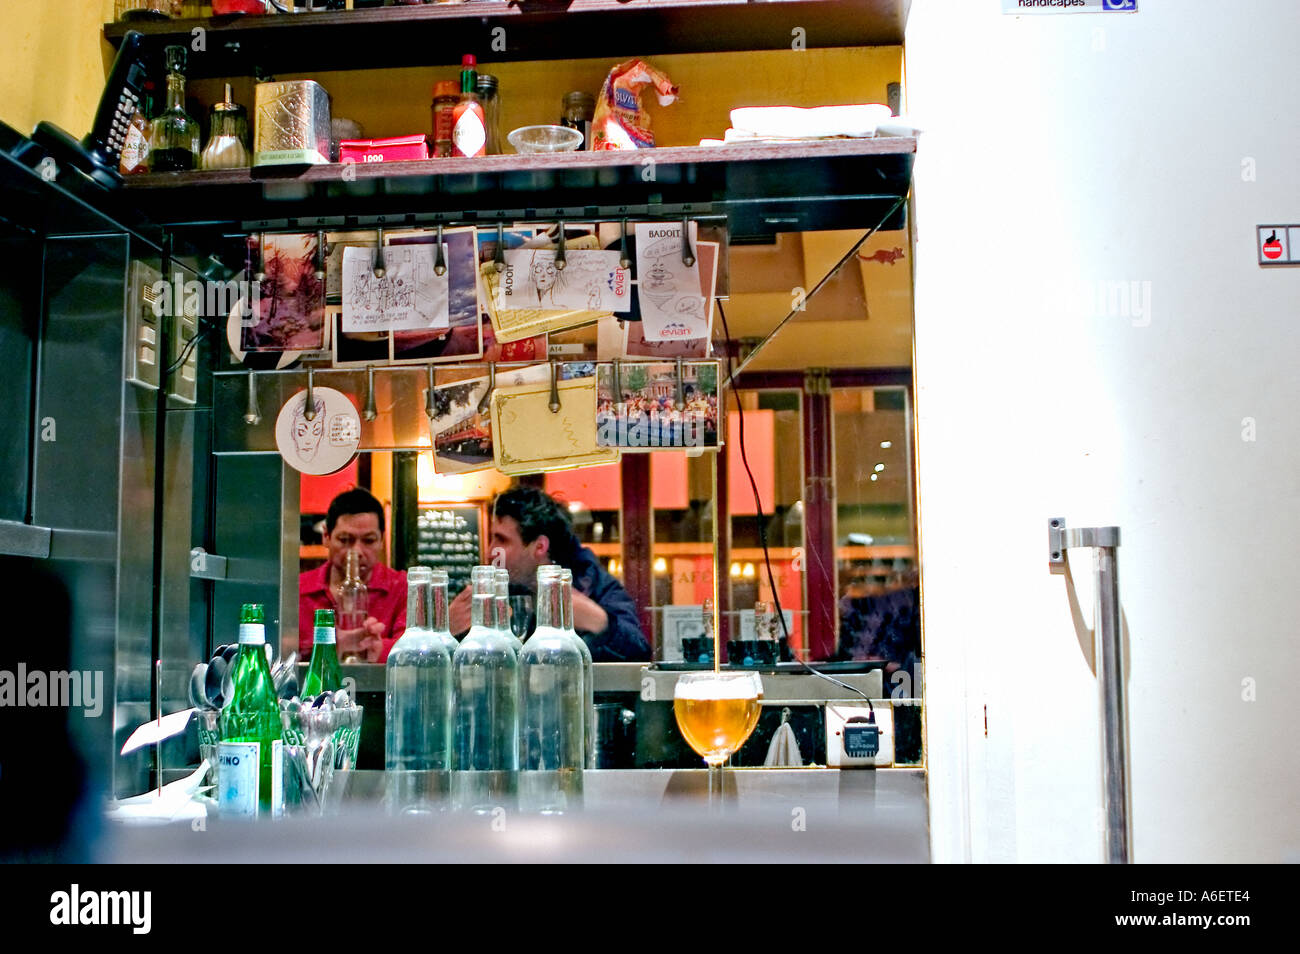 Paris France, Men Sharing Drink at French Bar in 'L'Autre Cafe' 'Rue Oberkampf' mirror reflection Travel Alcohol Holiday local neighborhood bar Stock Photo